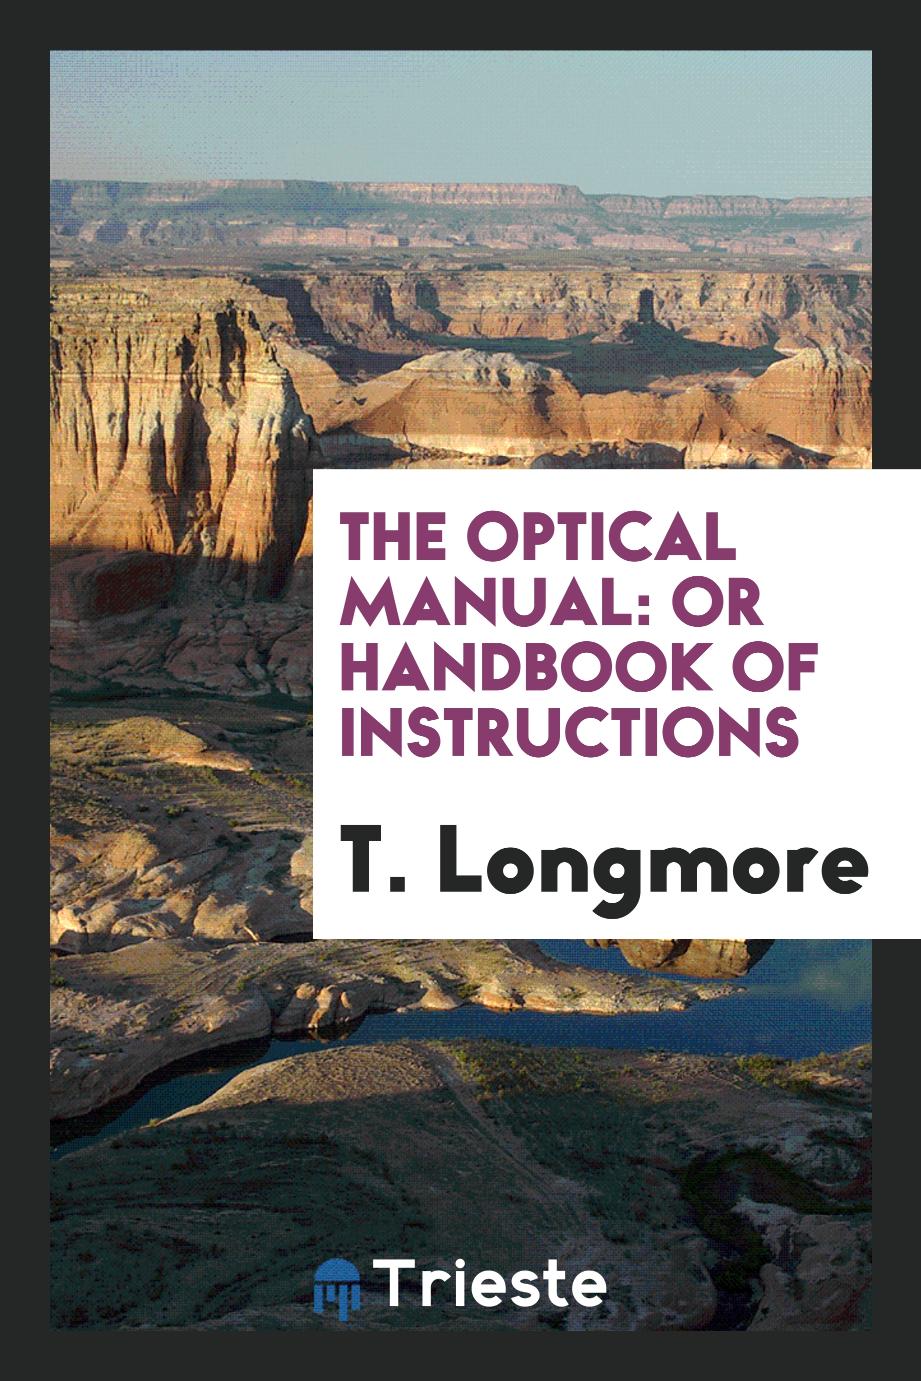 The Optical Manual: Or Handbook of Instructions